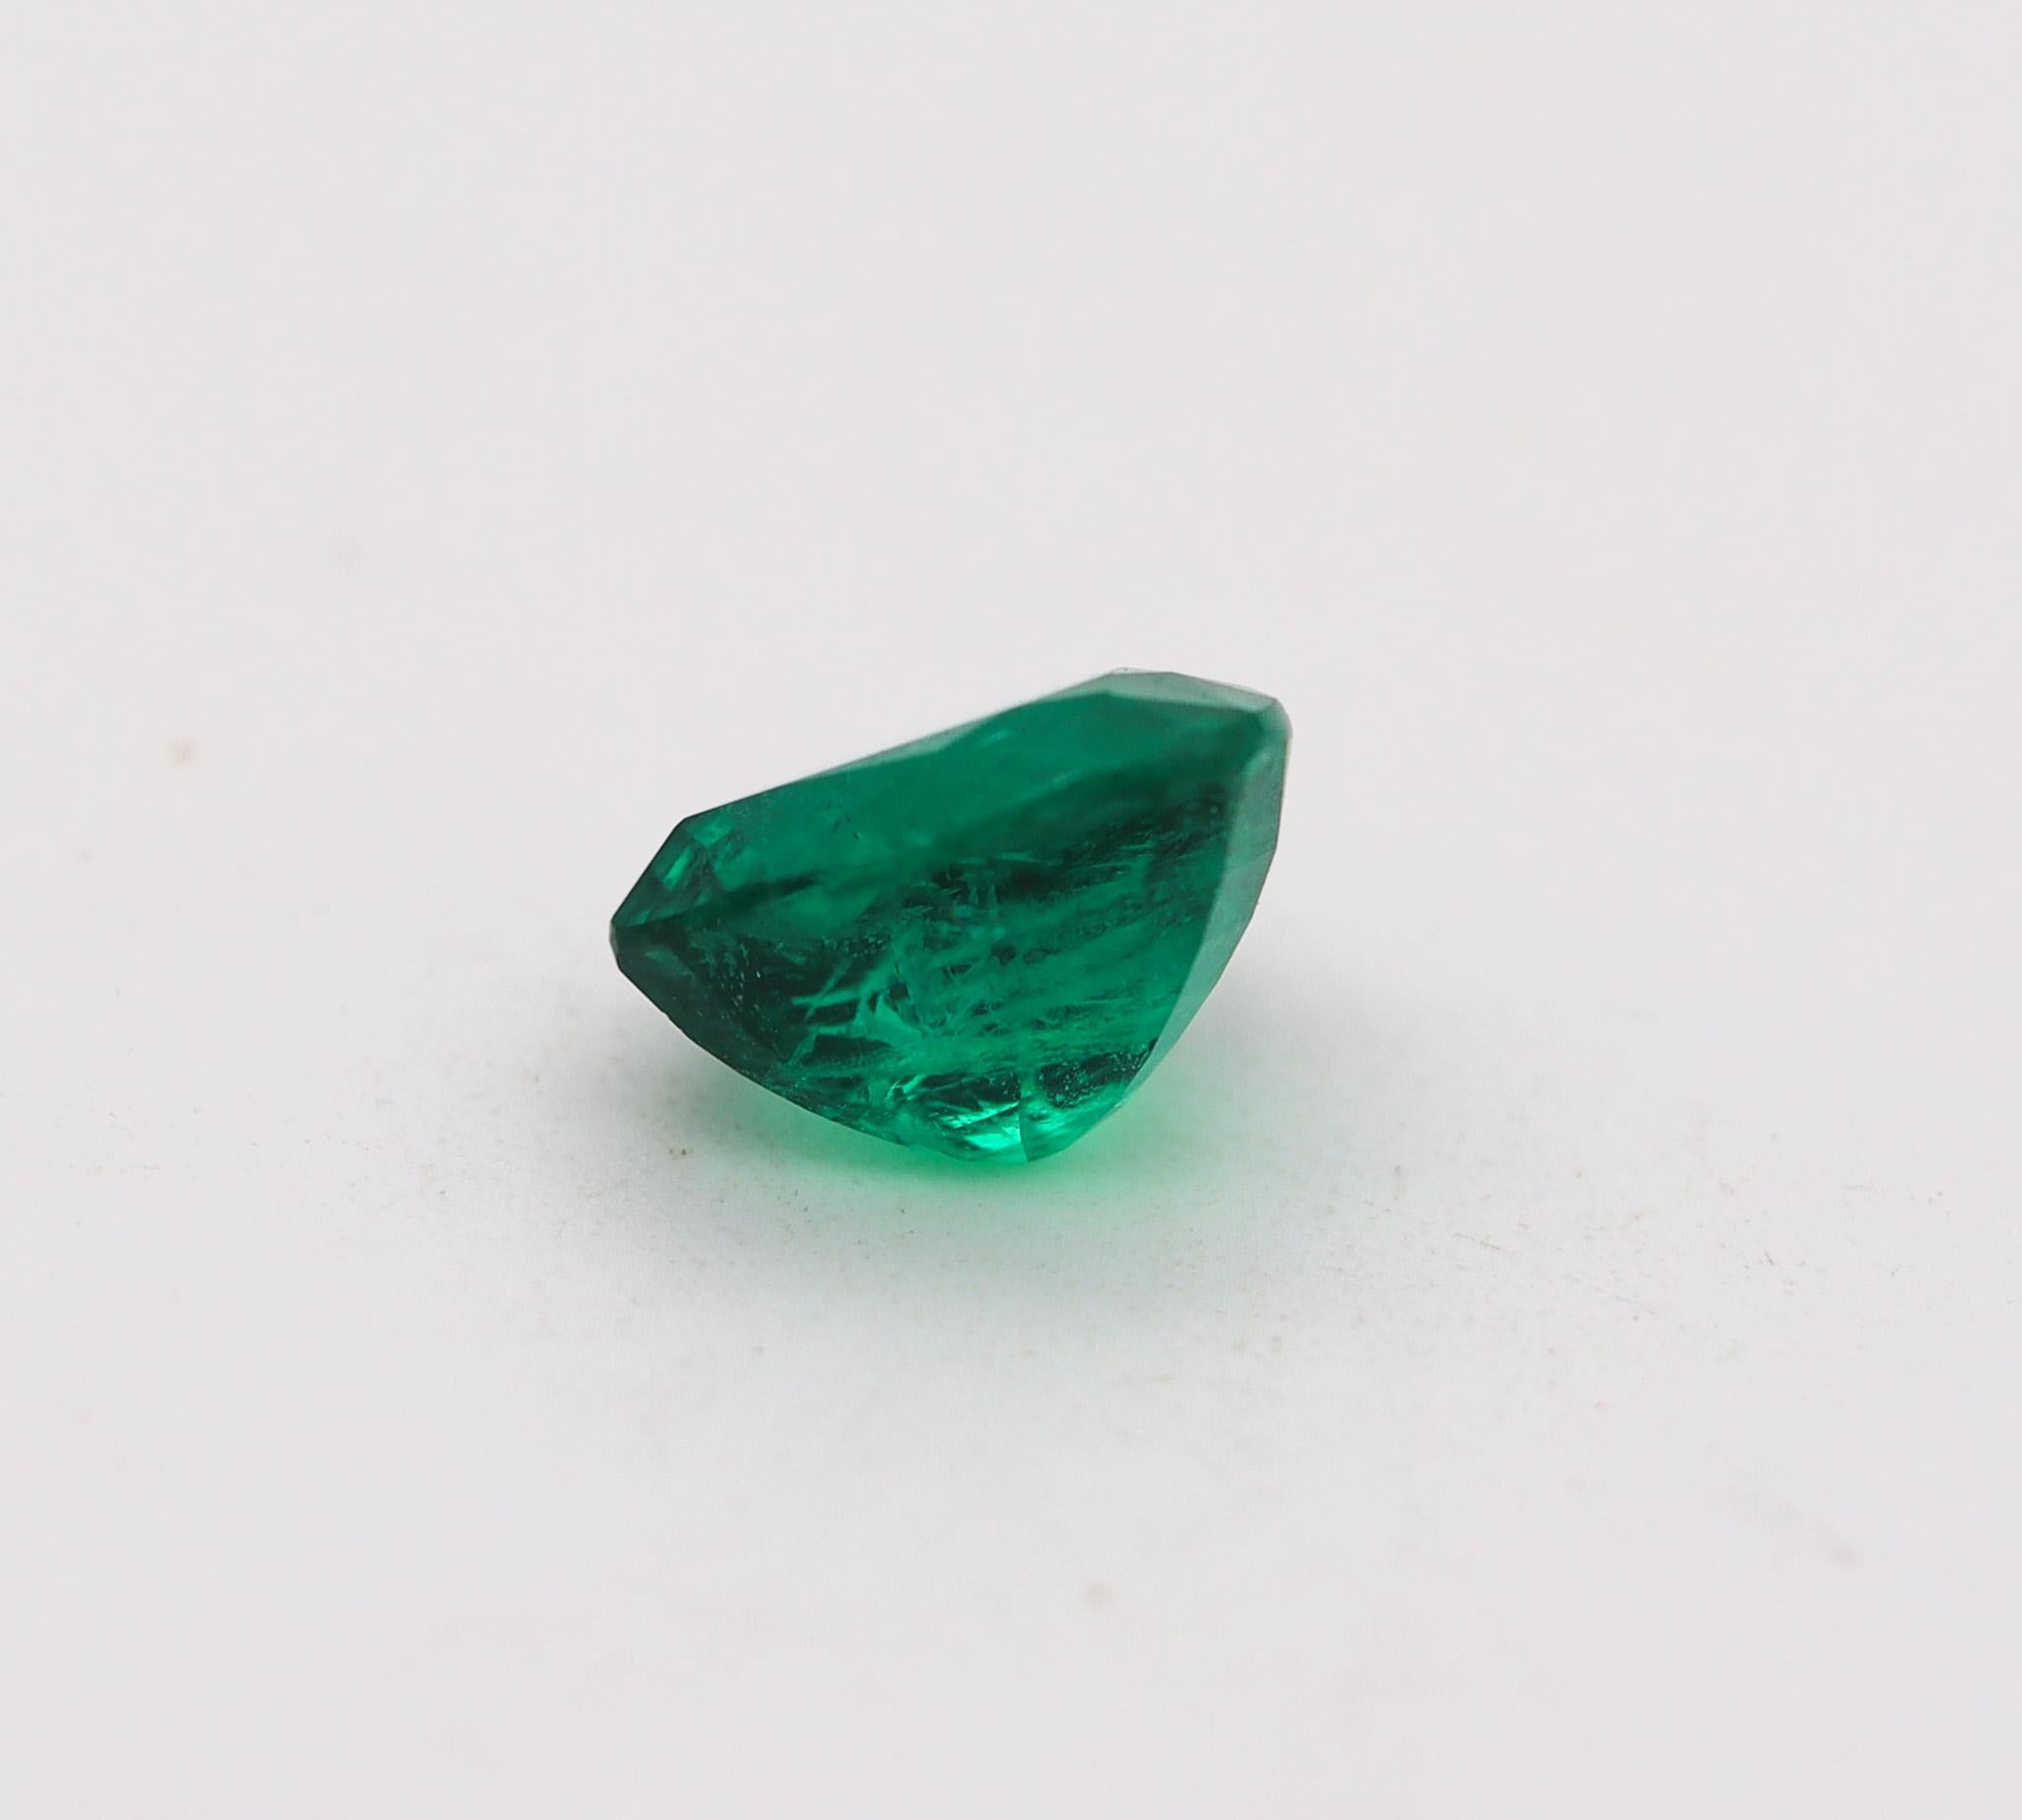 Modern Gia Certified Emerald 5.07 Carats Heart Shaped Cut Great Vivid Green For Sale